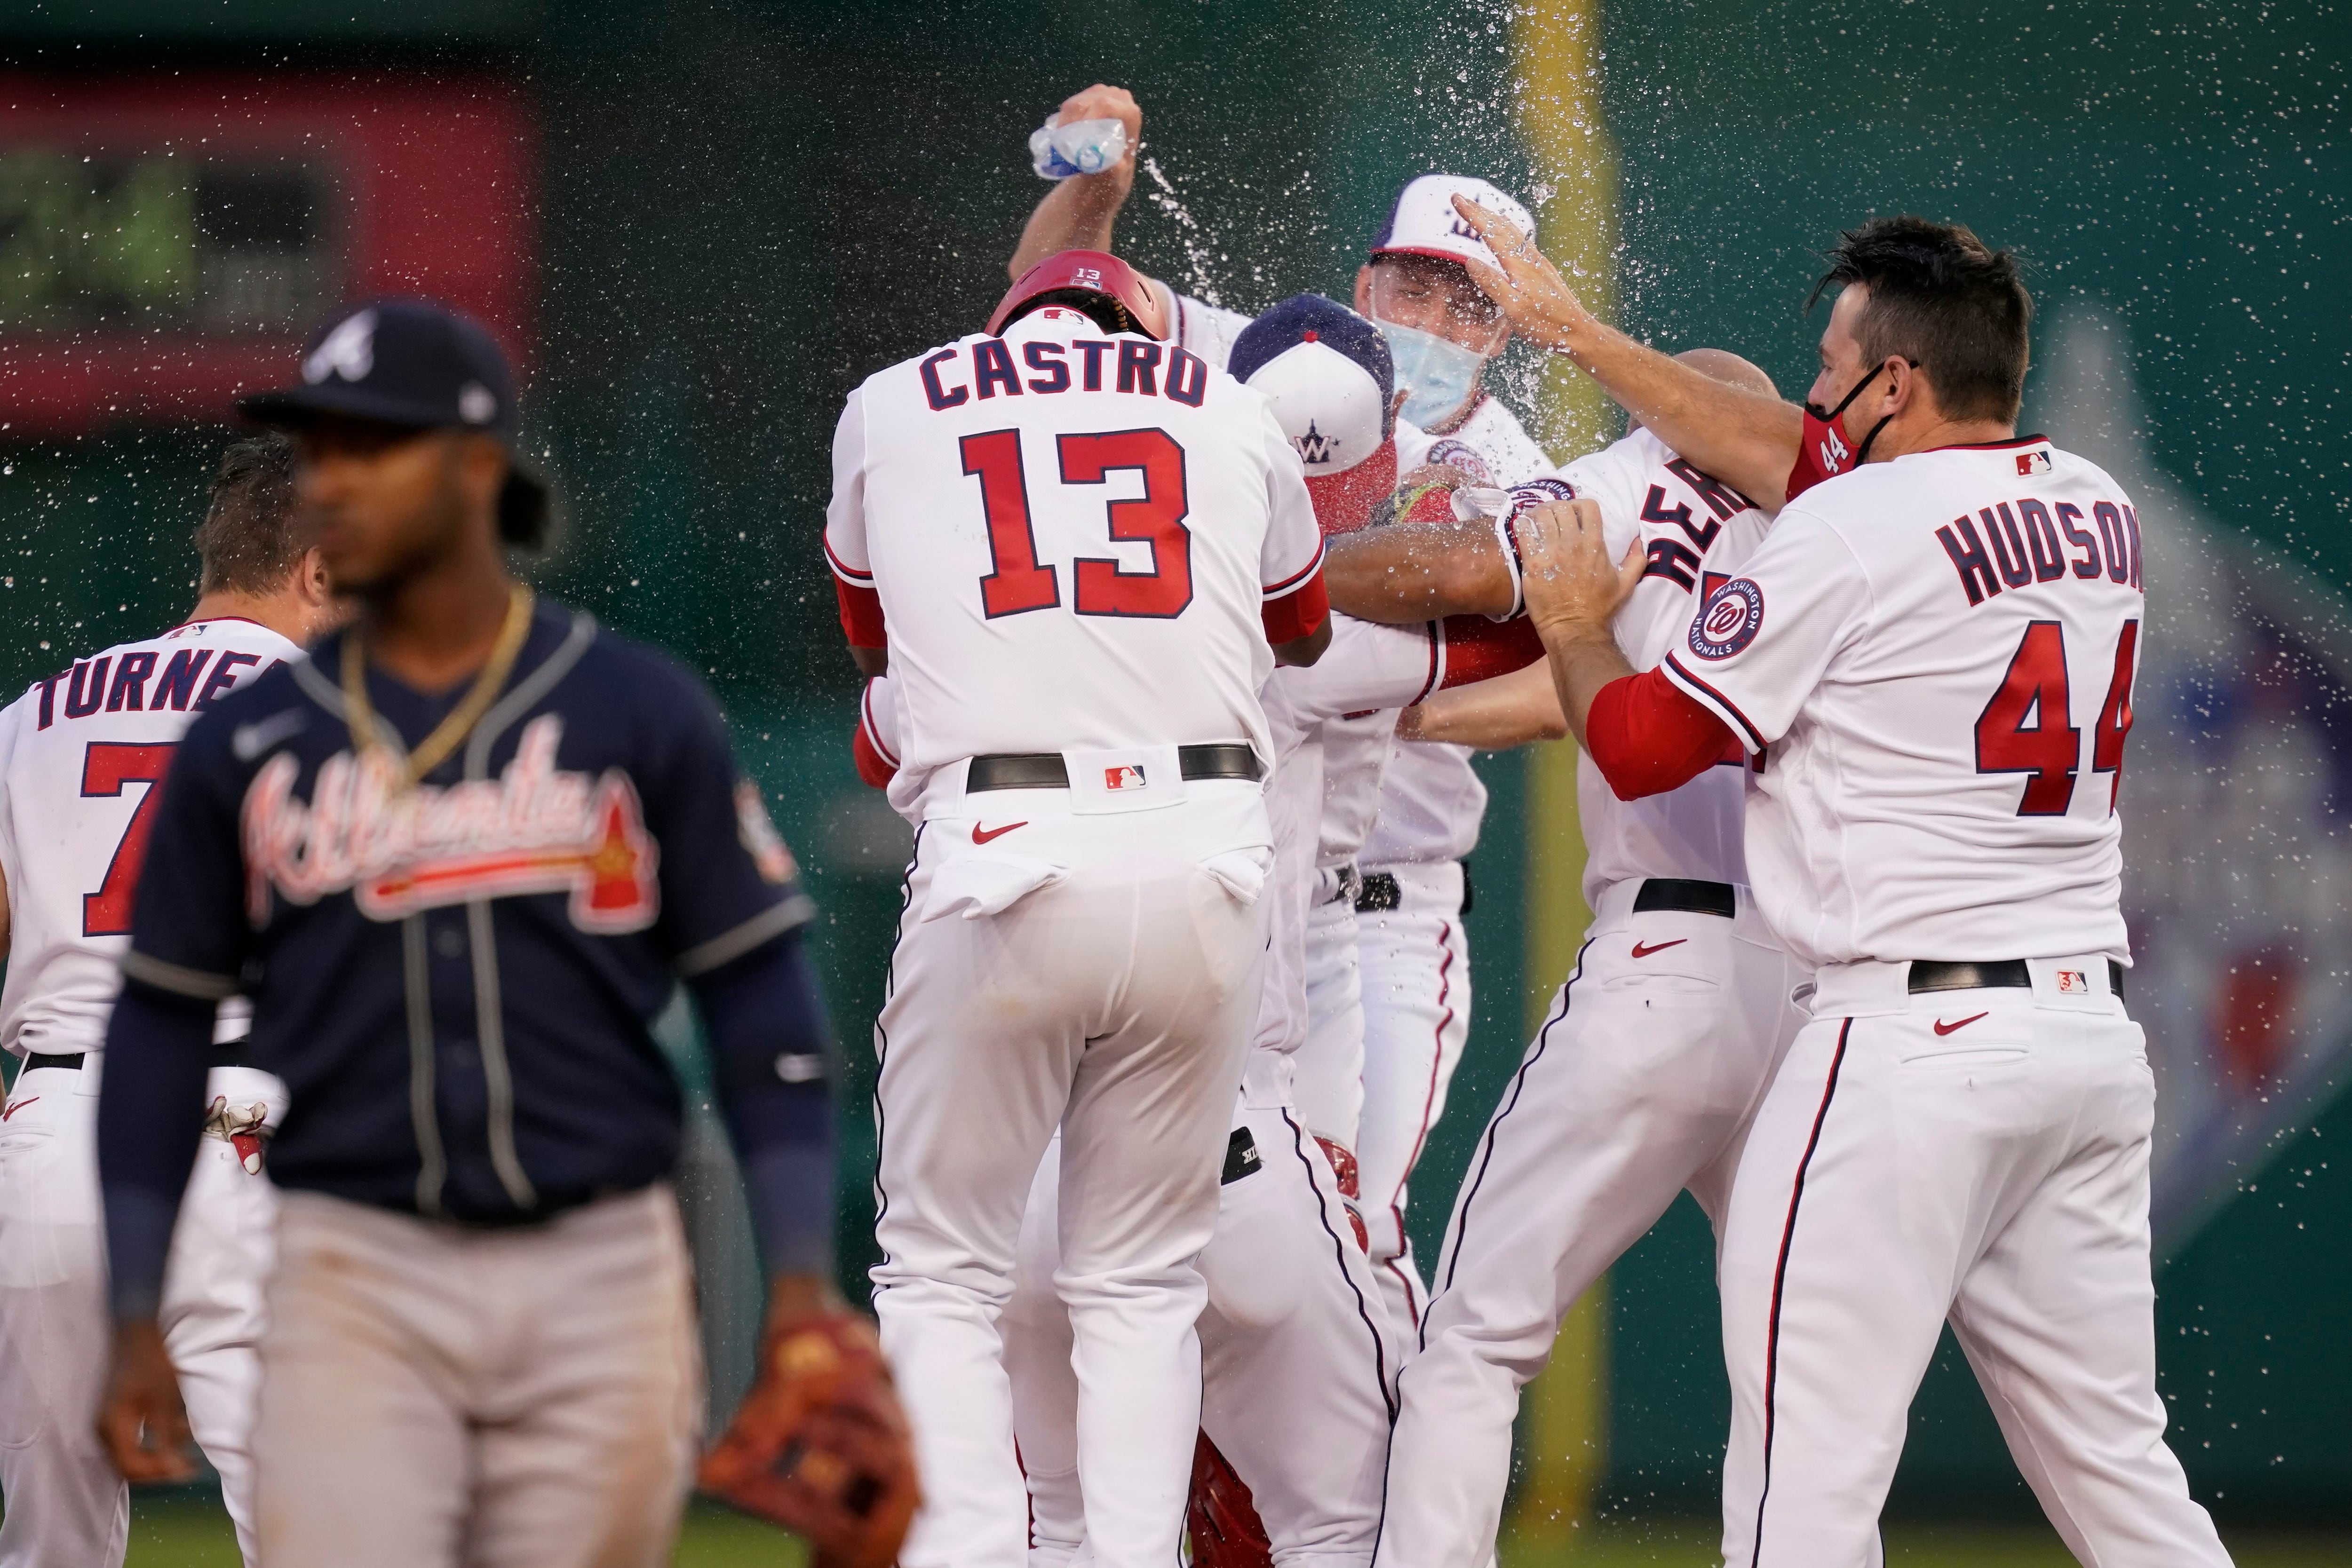 Cardinals score twice in bottom of the 9th, beat Braves 6-5